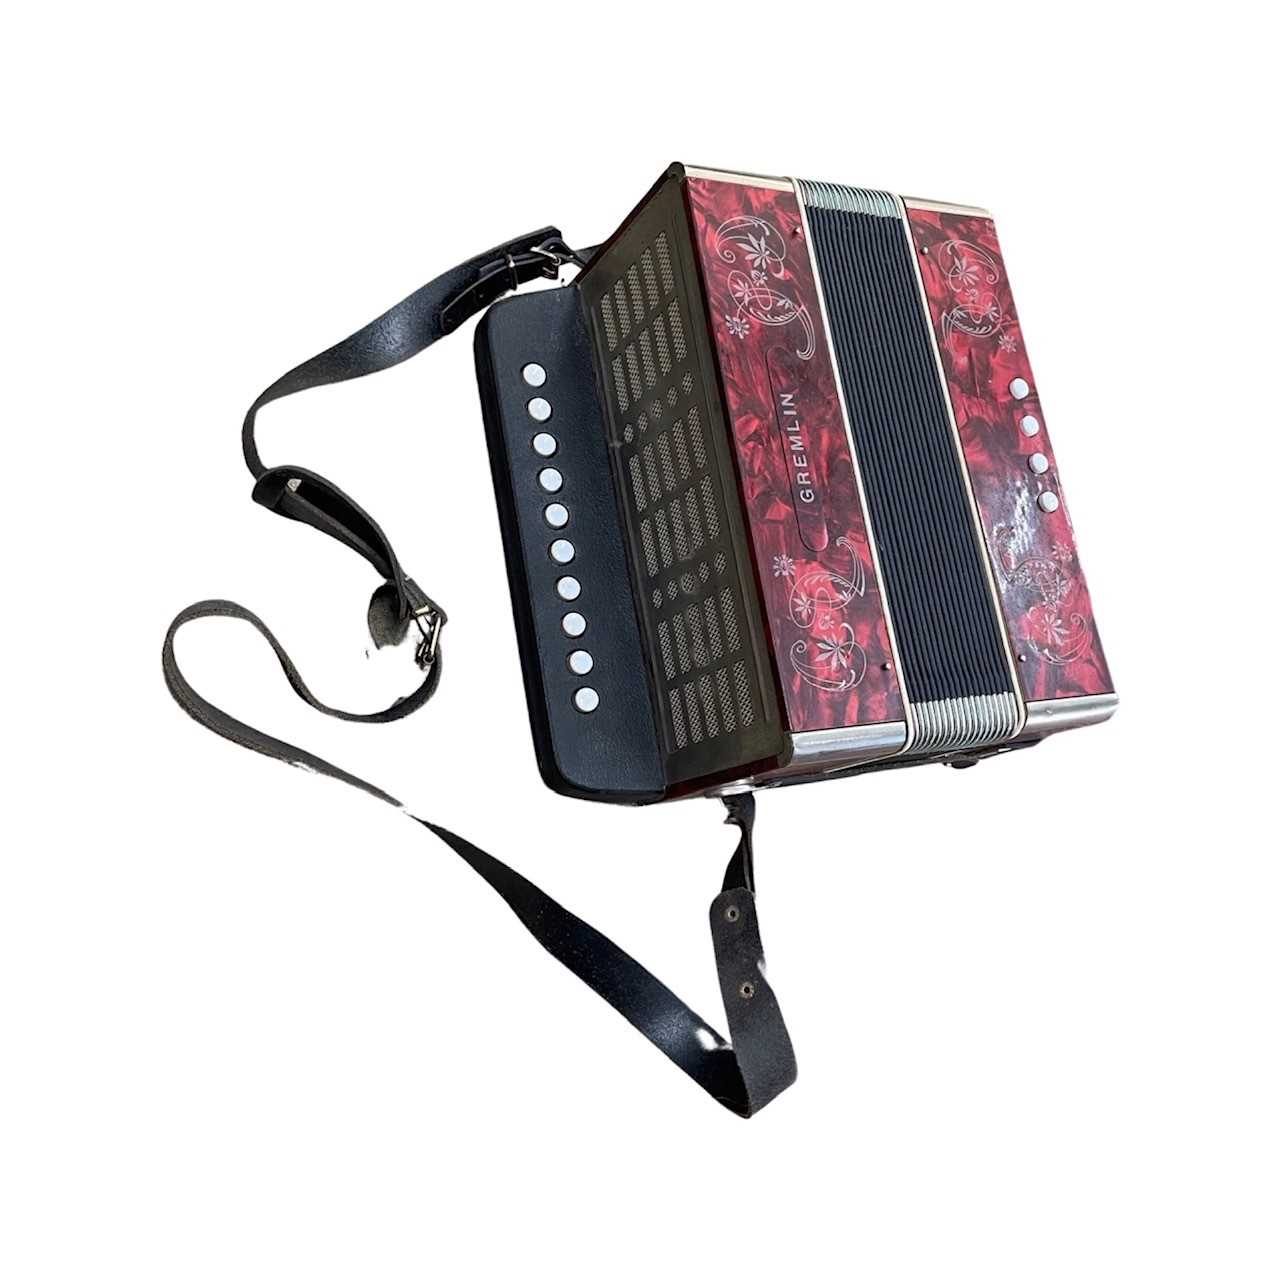 A Gremlin accordion with etched floral details on a marbled deep red background